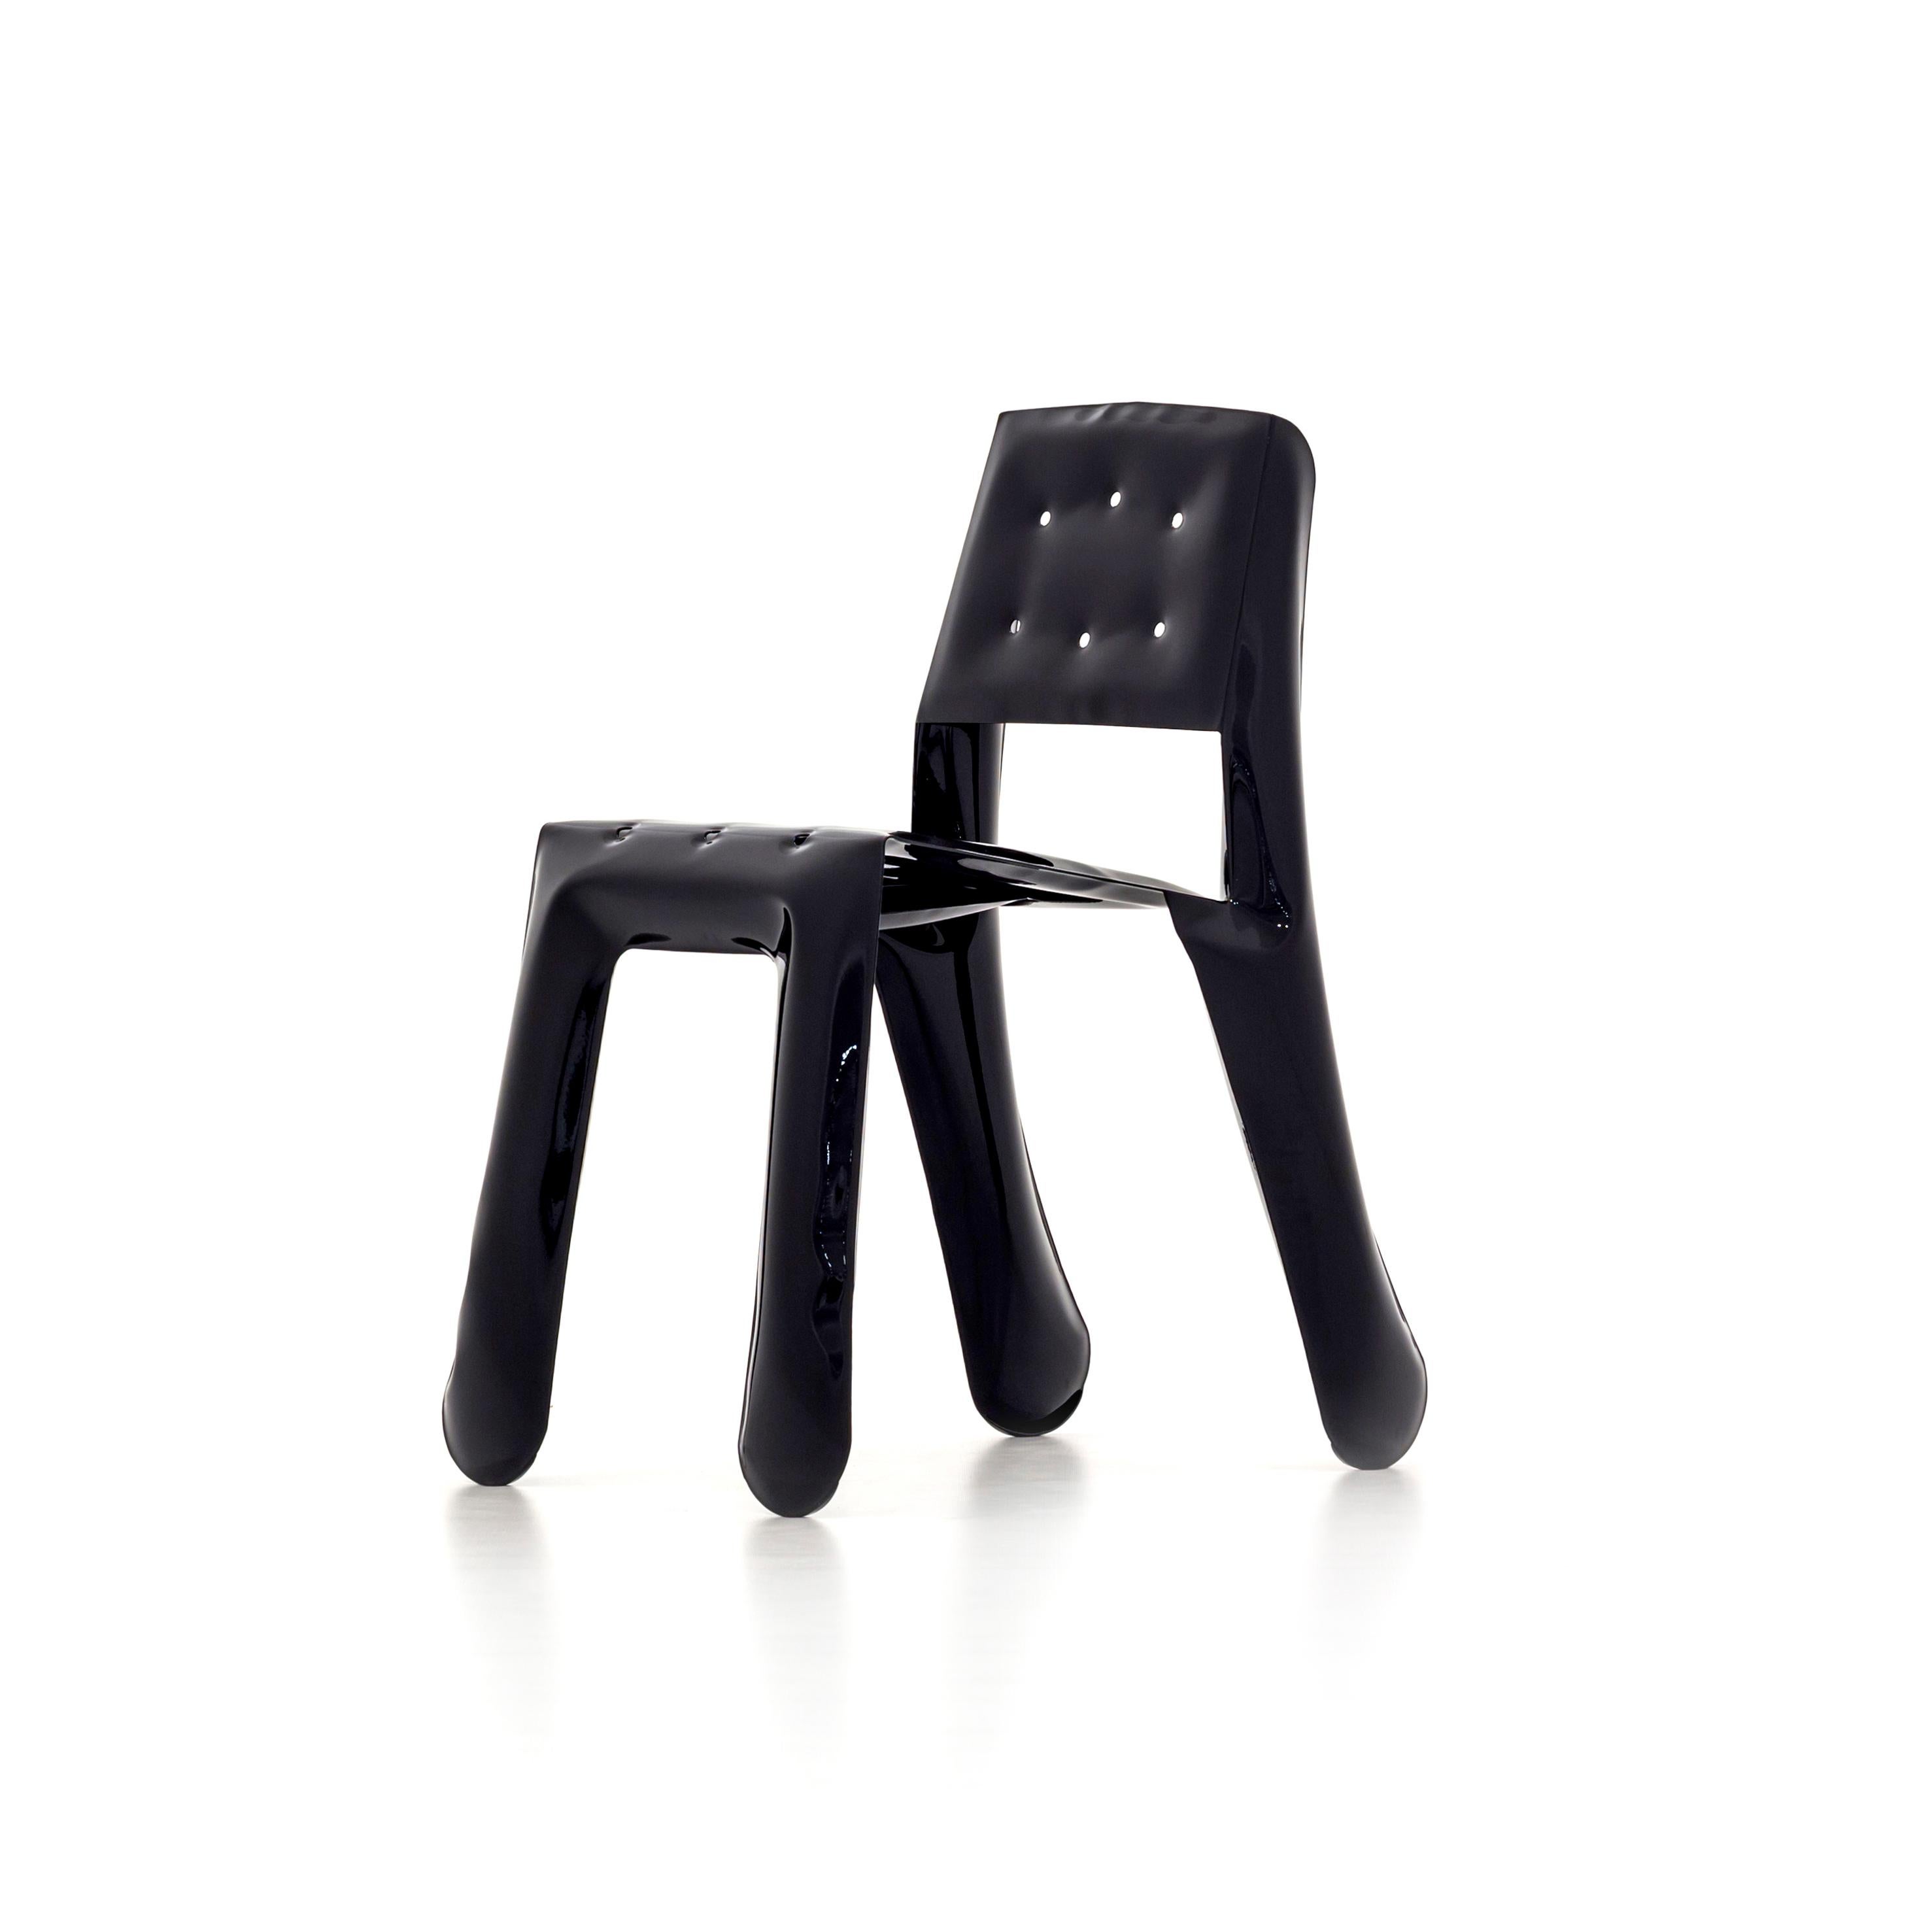 Black Carbon Steel Chippensteel 0.5 Sculptural Chair by Zieta
Dimensions: D 58 x W 46 x H 80 cm 
Material: Carbon steel. 
Finish: Powder-Coated. Glossy finish. 
Also available in colors: White Matt, Beige, Black, Blue-Gray, Graphite, Moss-Gray, and,